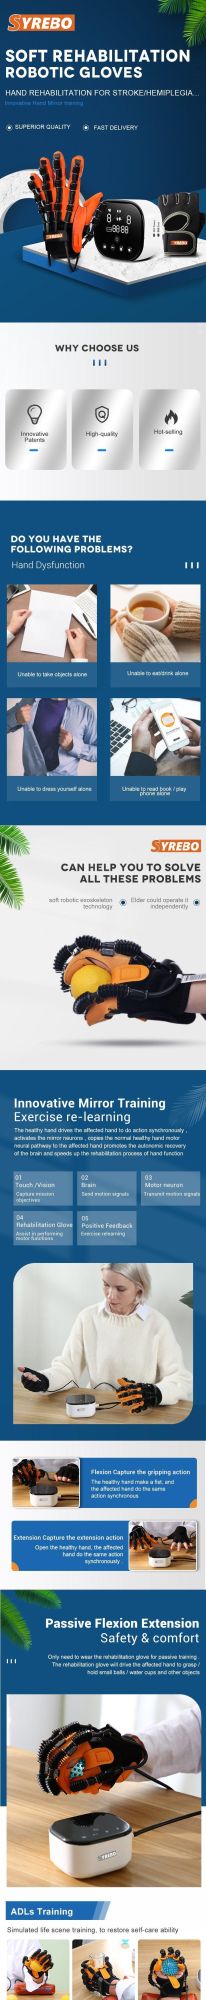 2022 New Hand Rehabilitation Robot Gloves for Stroke Patients